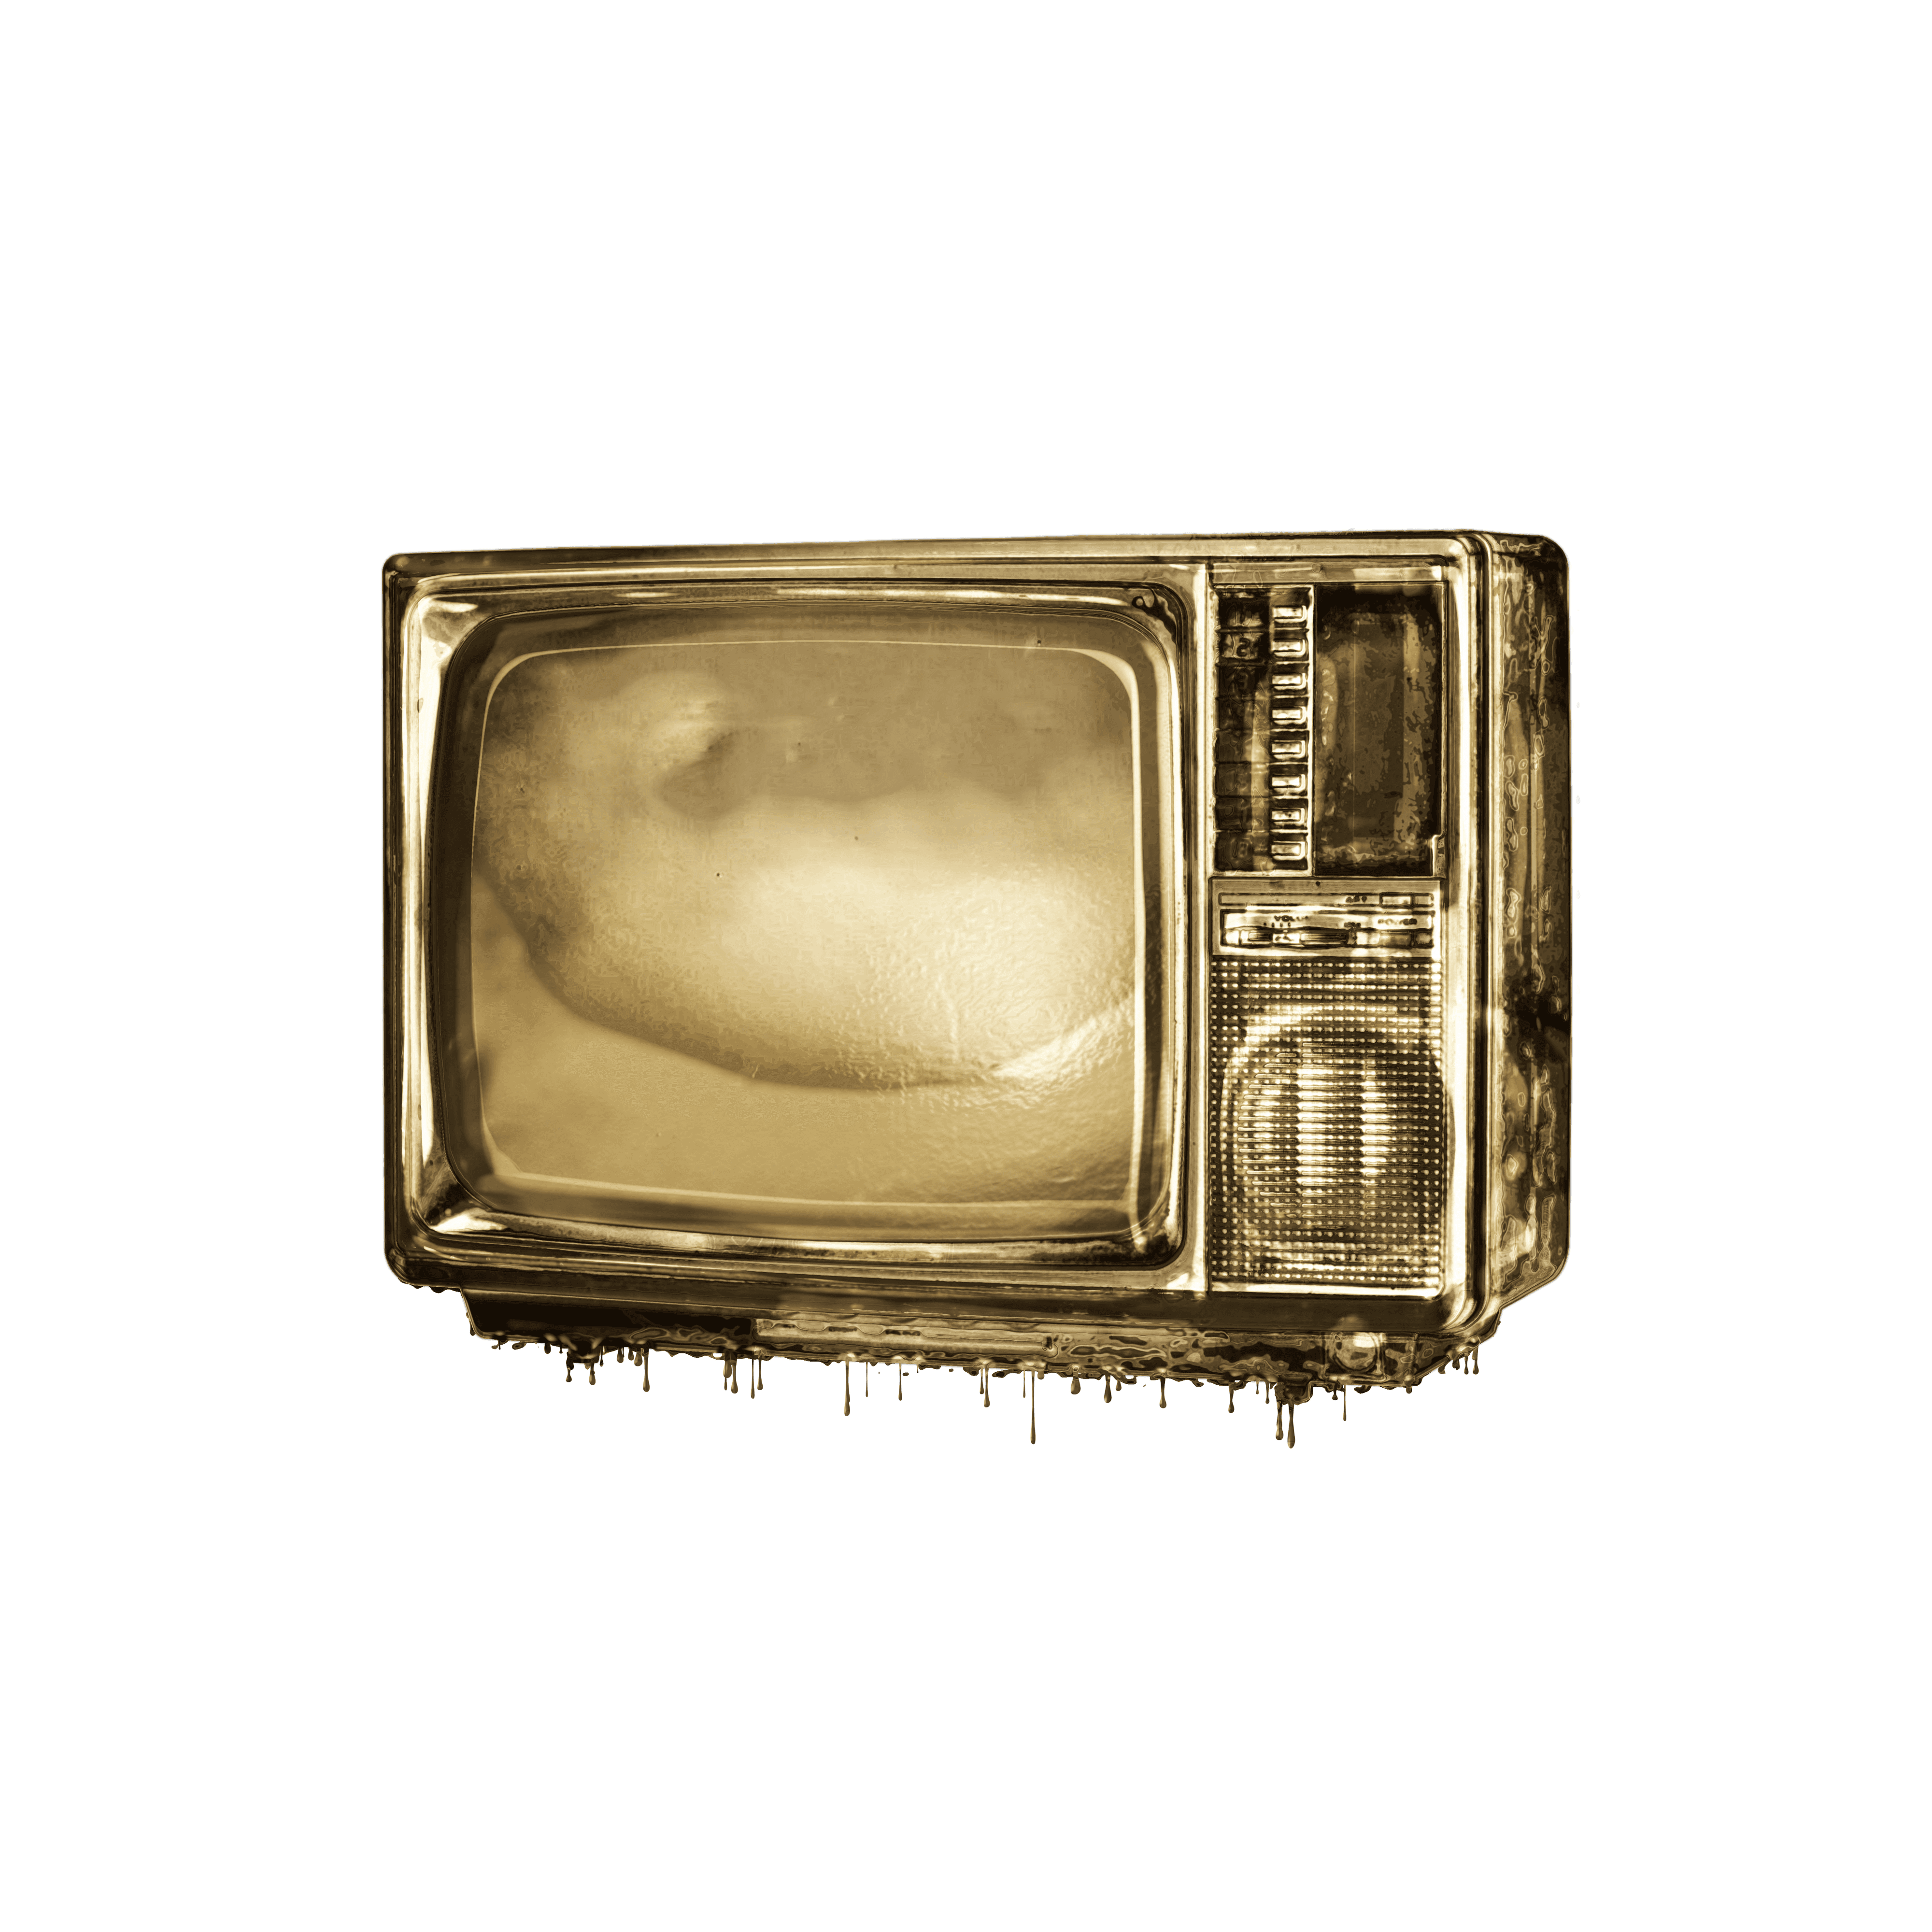 Television of Gold